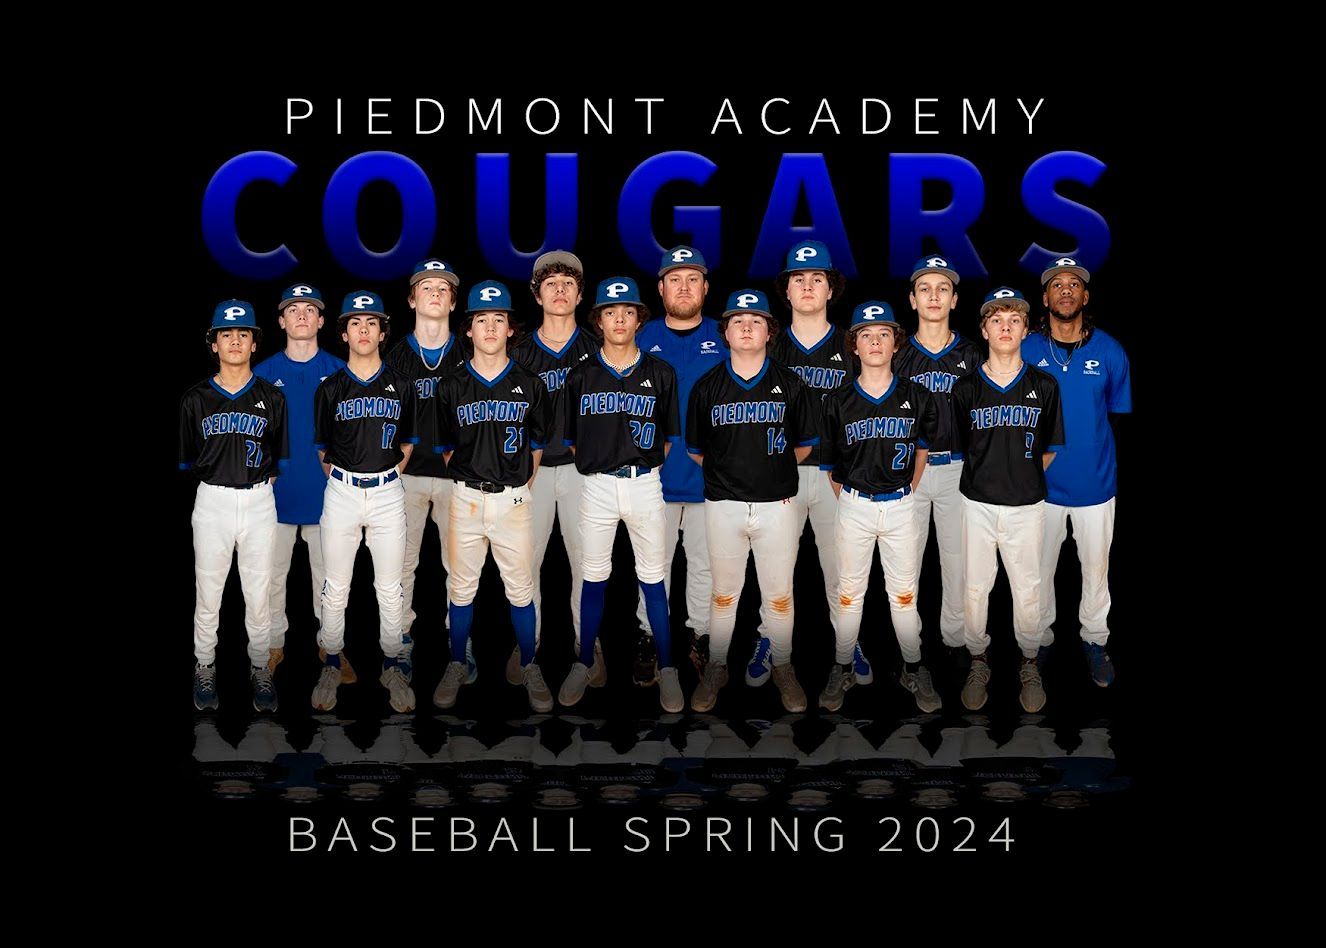 the piedmont academy cougars baseball team poses for a team photo